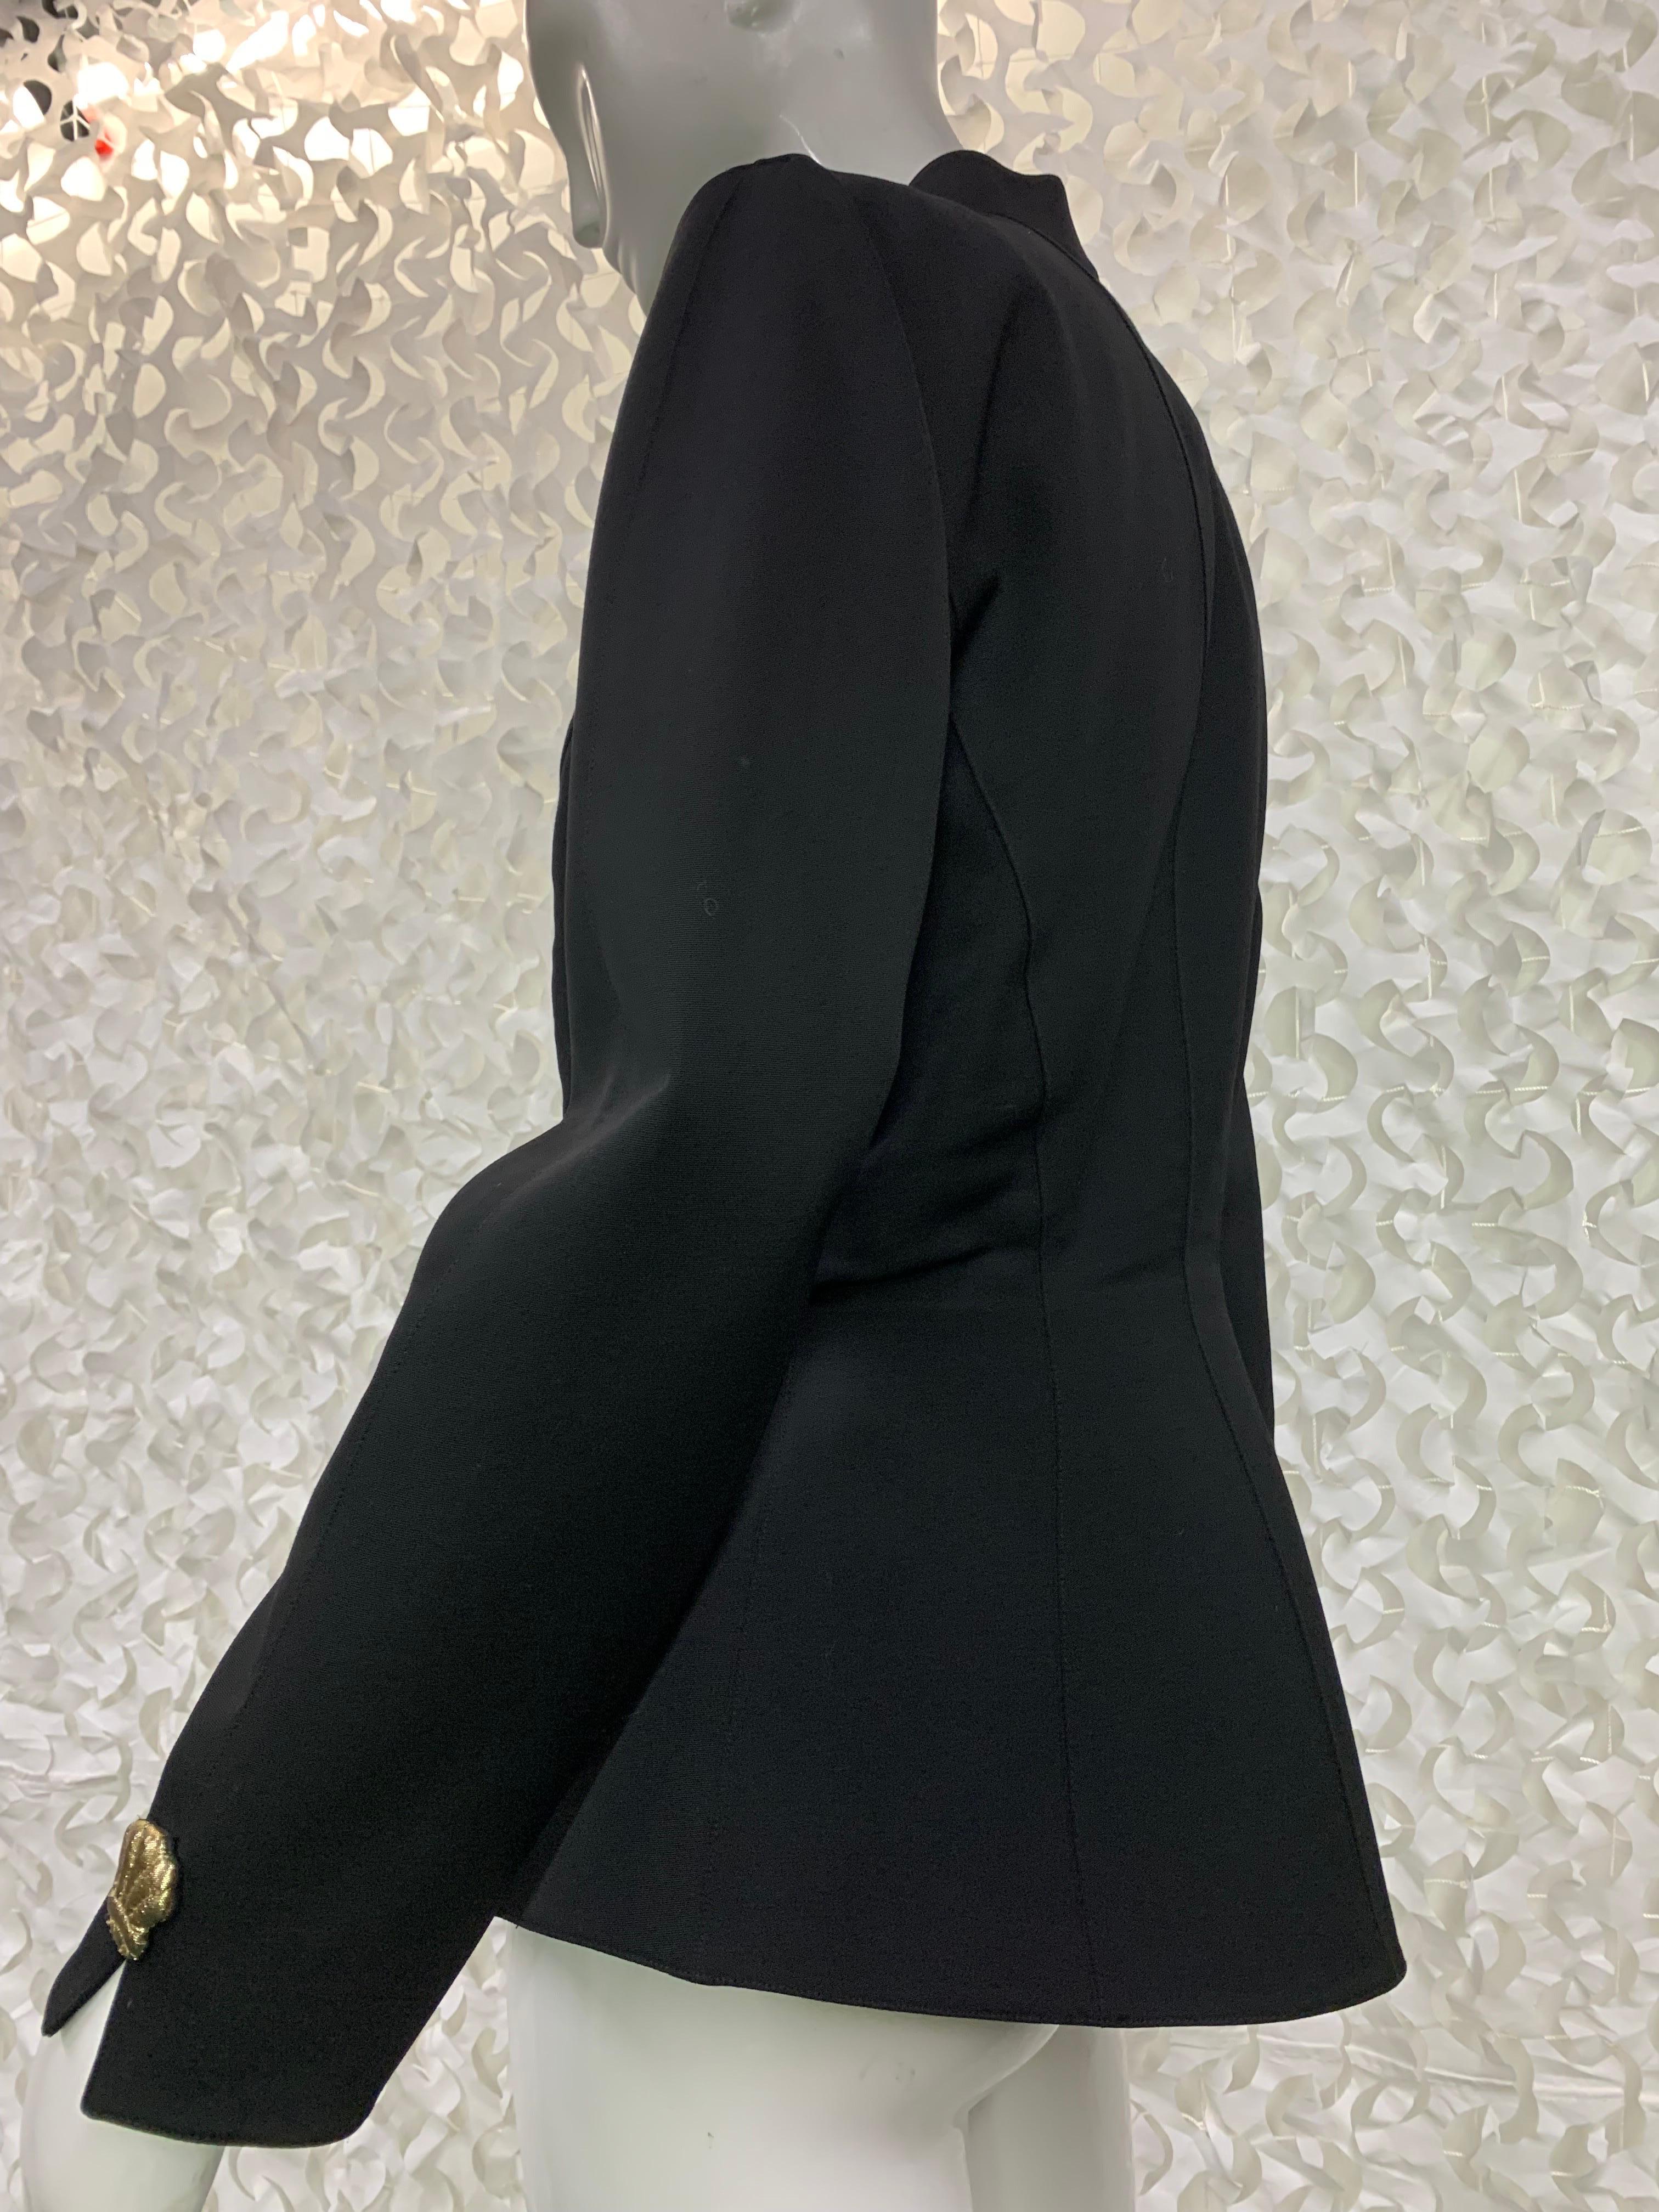 1990s Thierry Mugler Black Wool Crepe Jacket w Gold Lame Fabric Shell Details  4